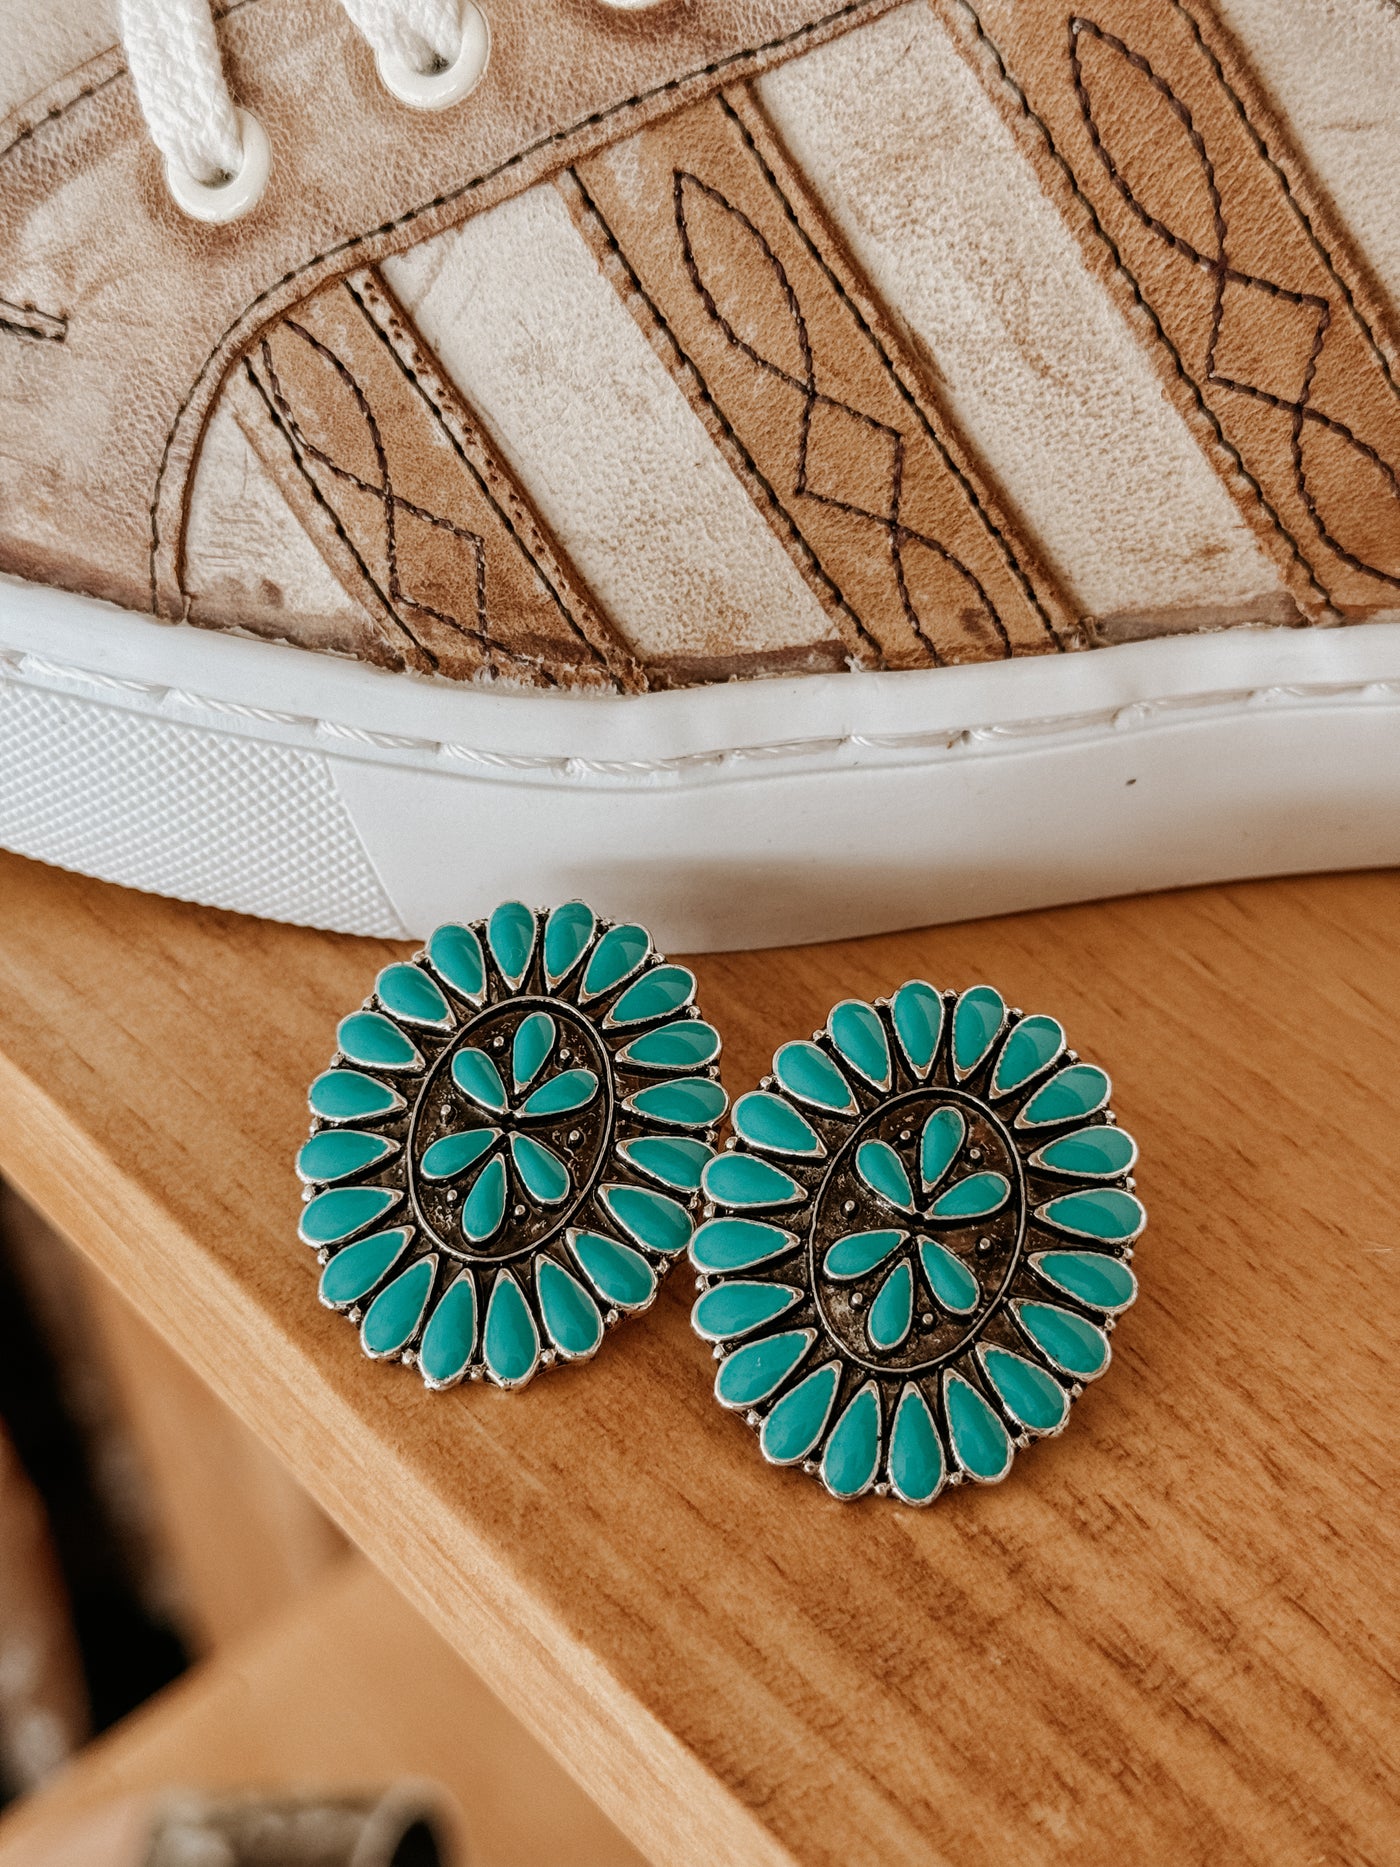 The Turquoise Cluster Earring